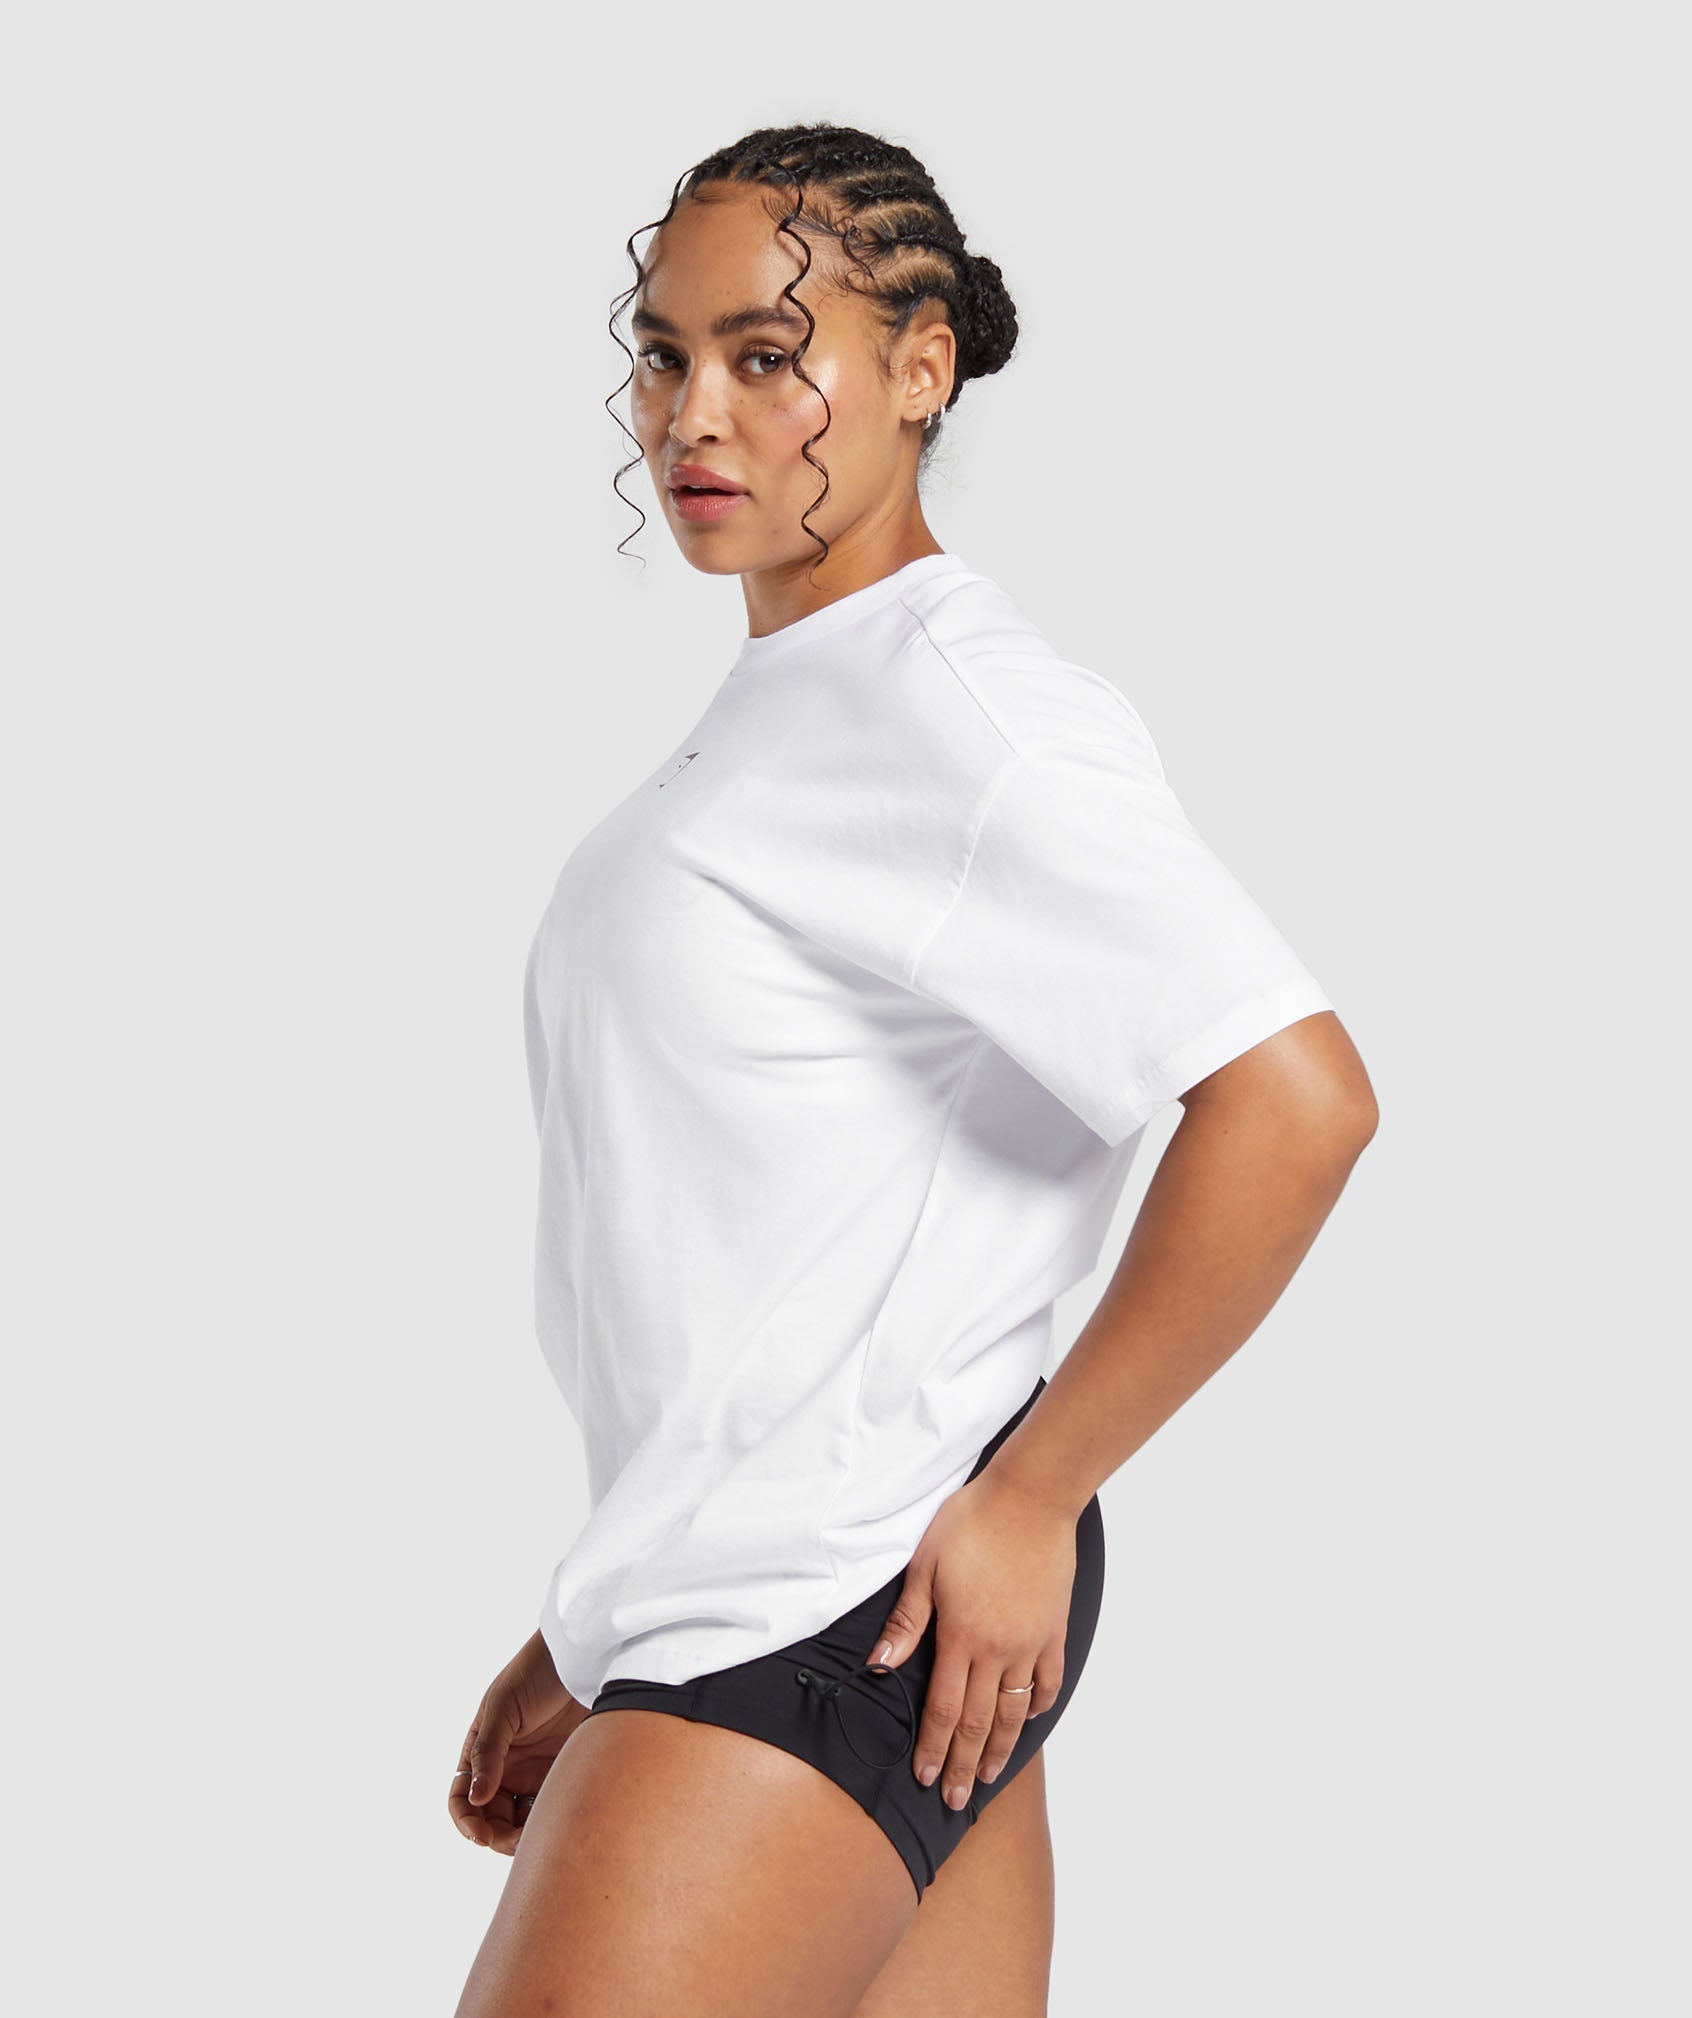 GSLC Oversized Tee in White - view 3